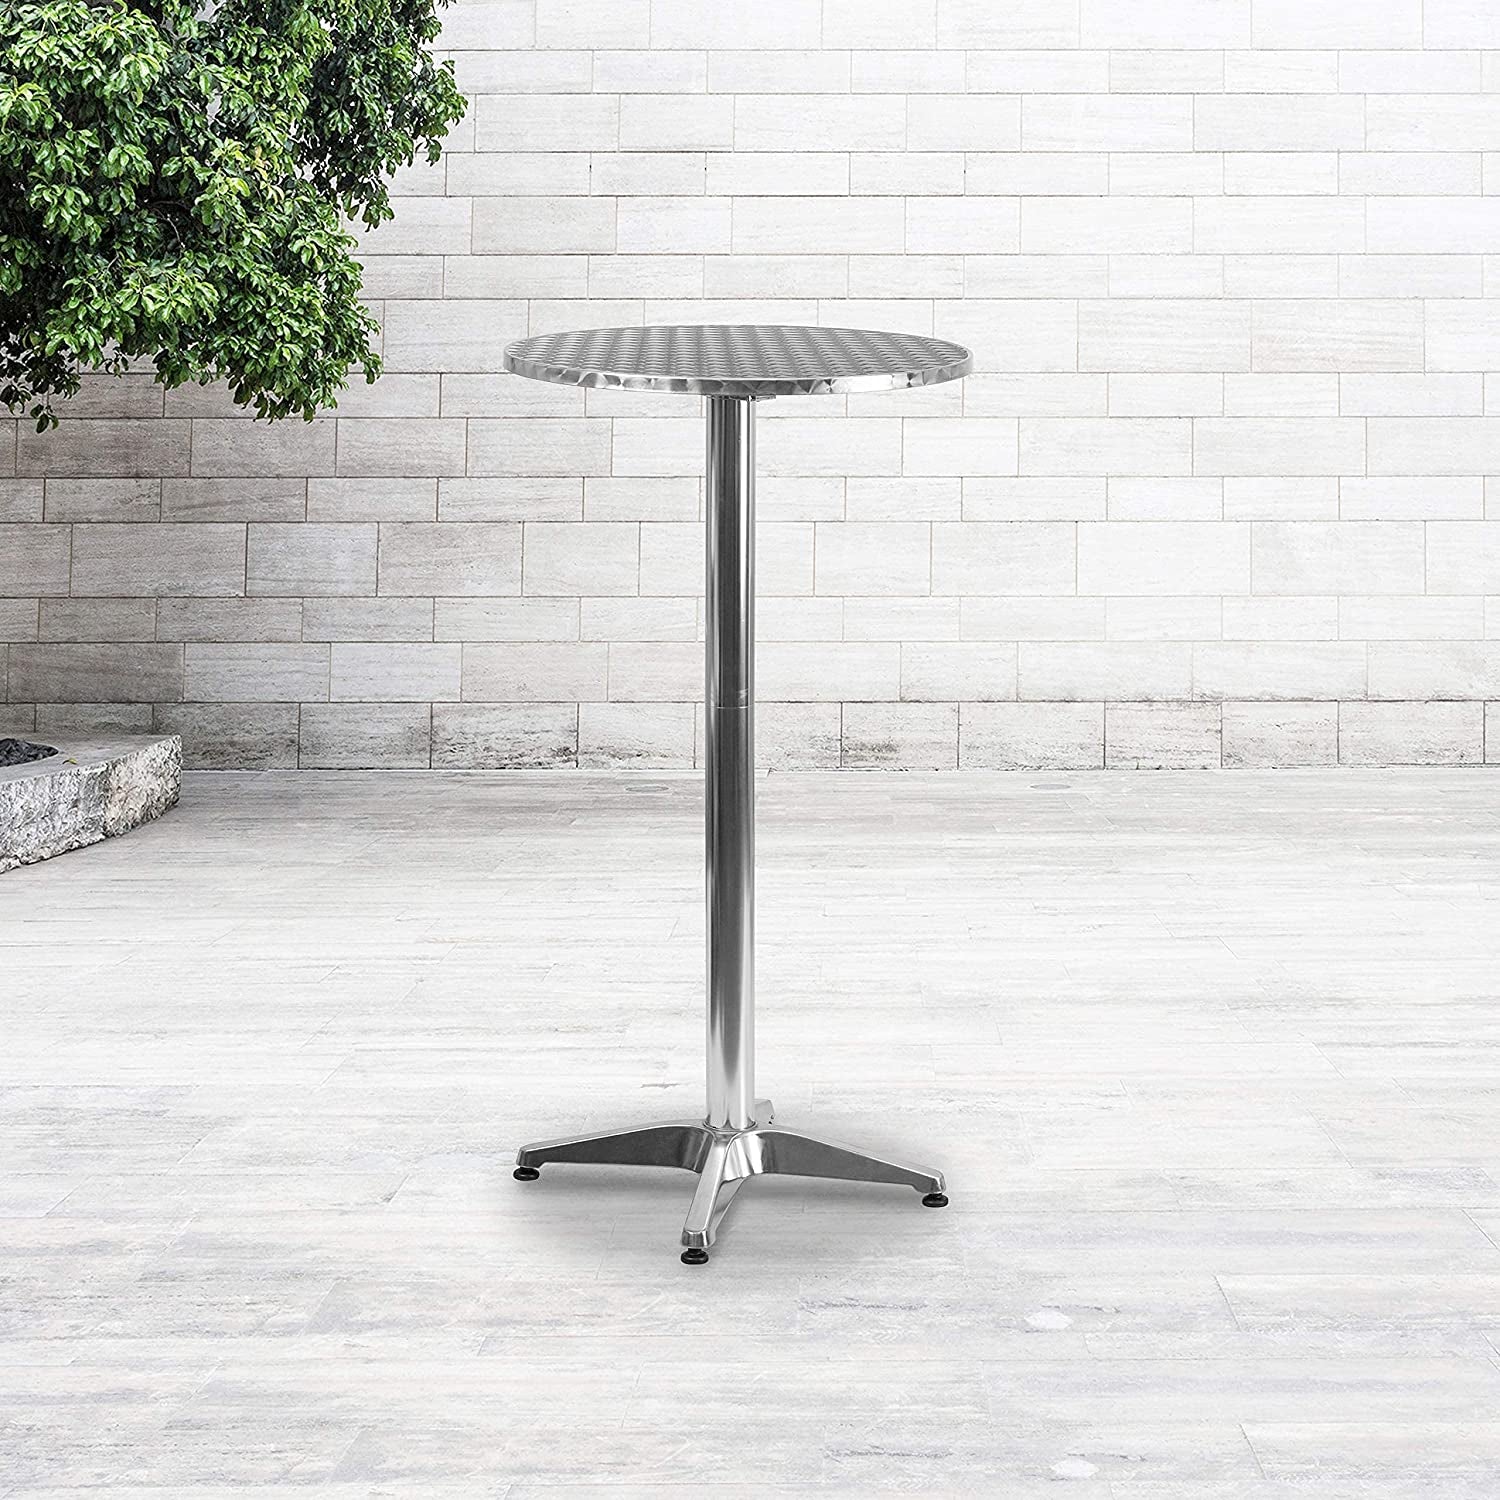 23.25" round Aluminum Indoor-Outdoor Bar Height Table with Flip-Up Table